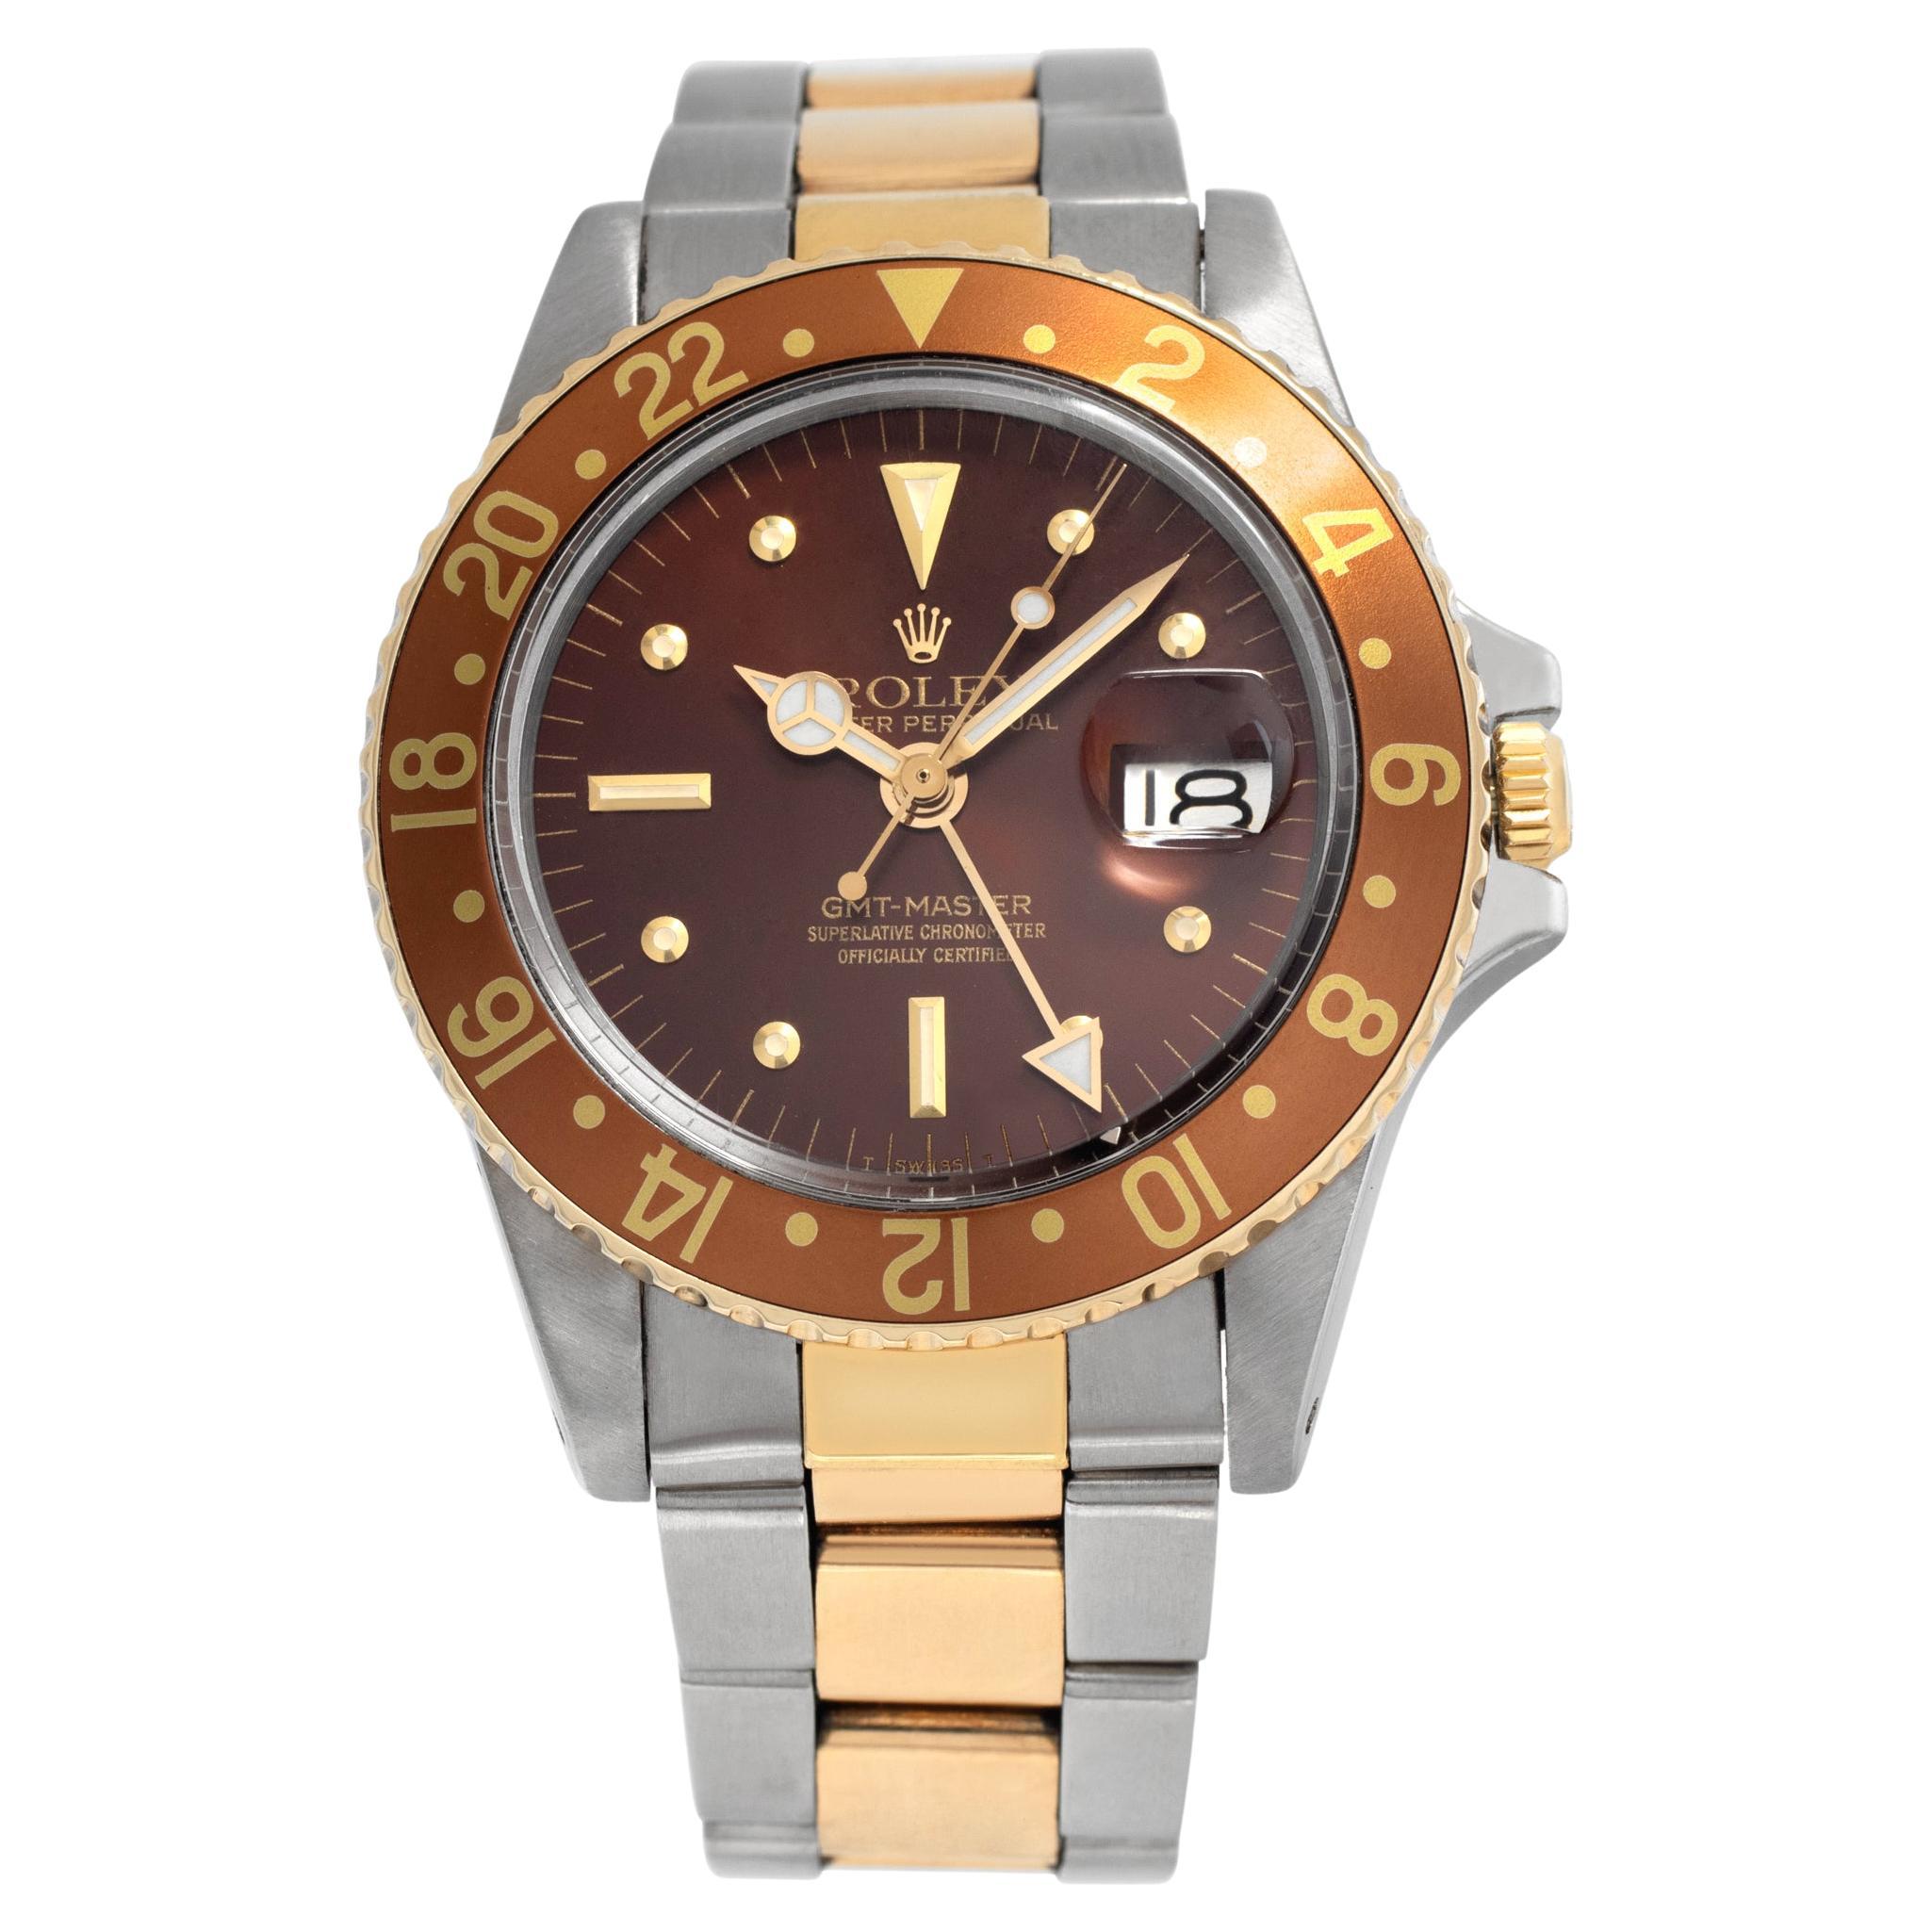 Rolex Gmt-Master "Rootbeer" 14k Gold & Stainless Steel Watch Ref 1675 For Sale